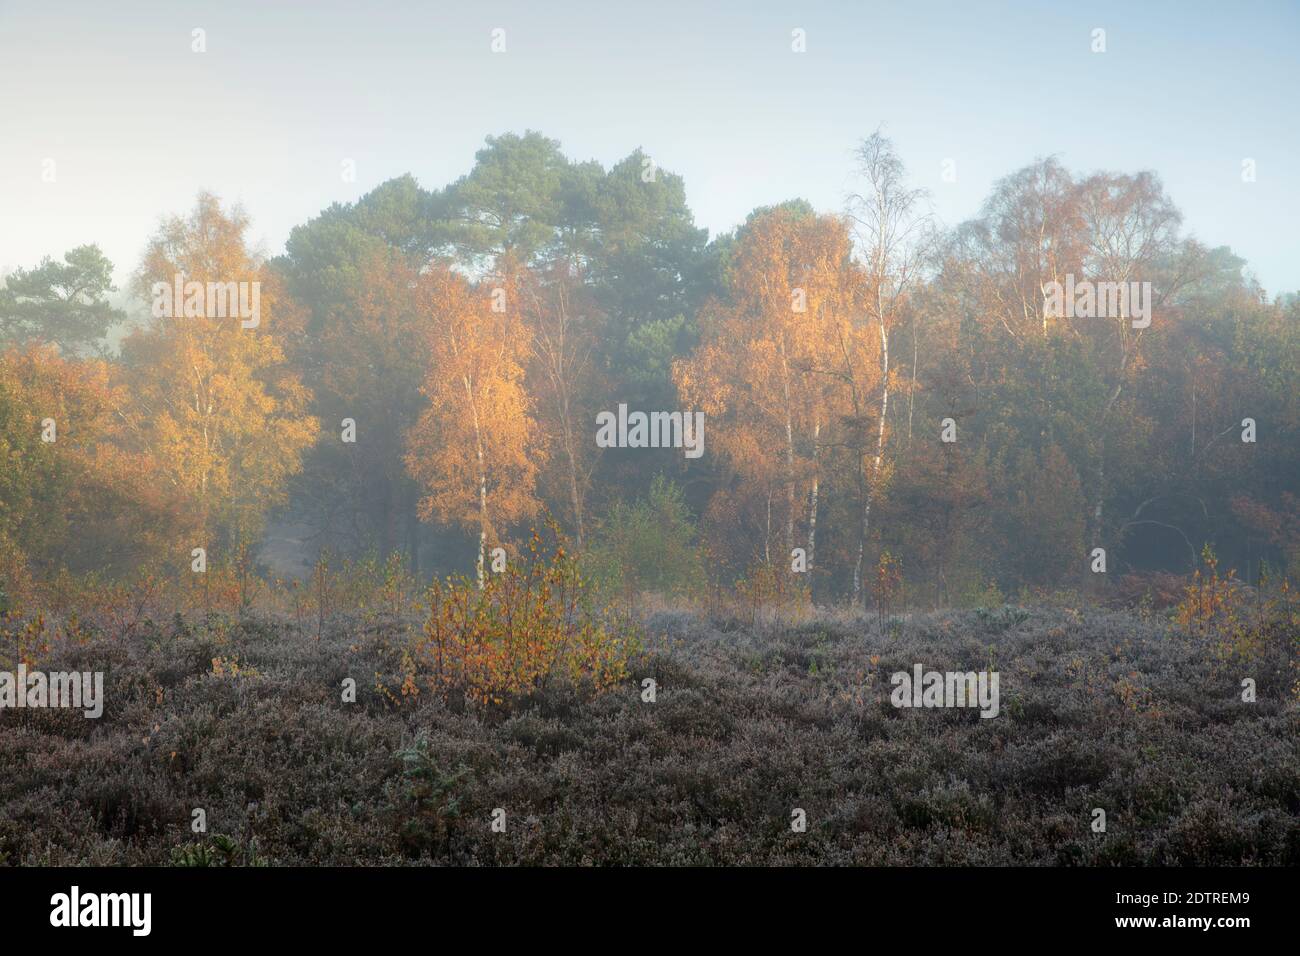 Autumn leaves on silver birch trees in dawn mist, Newtown Common, Burghclere, Hampshire, England, United Kingdom, Europe Stock Photo